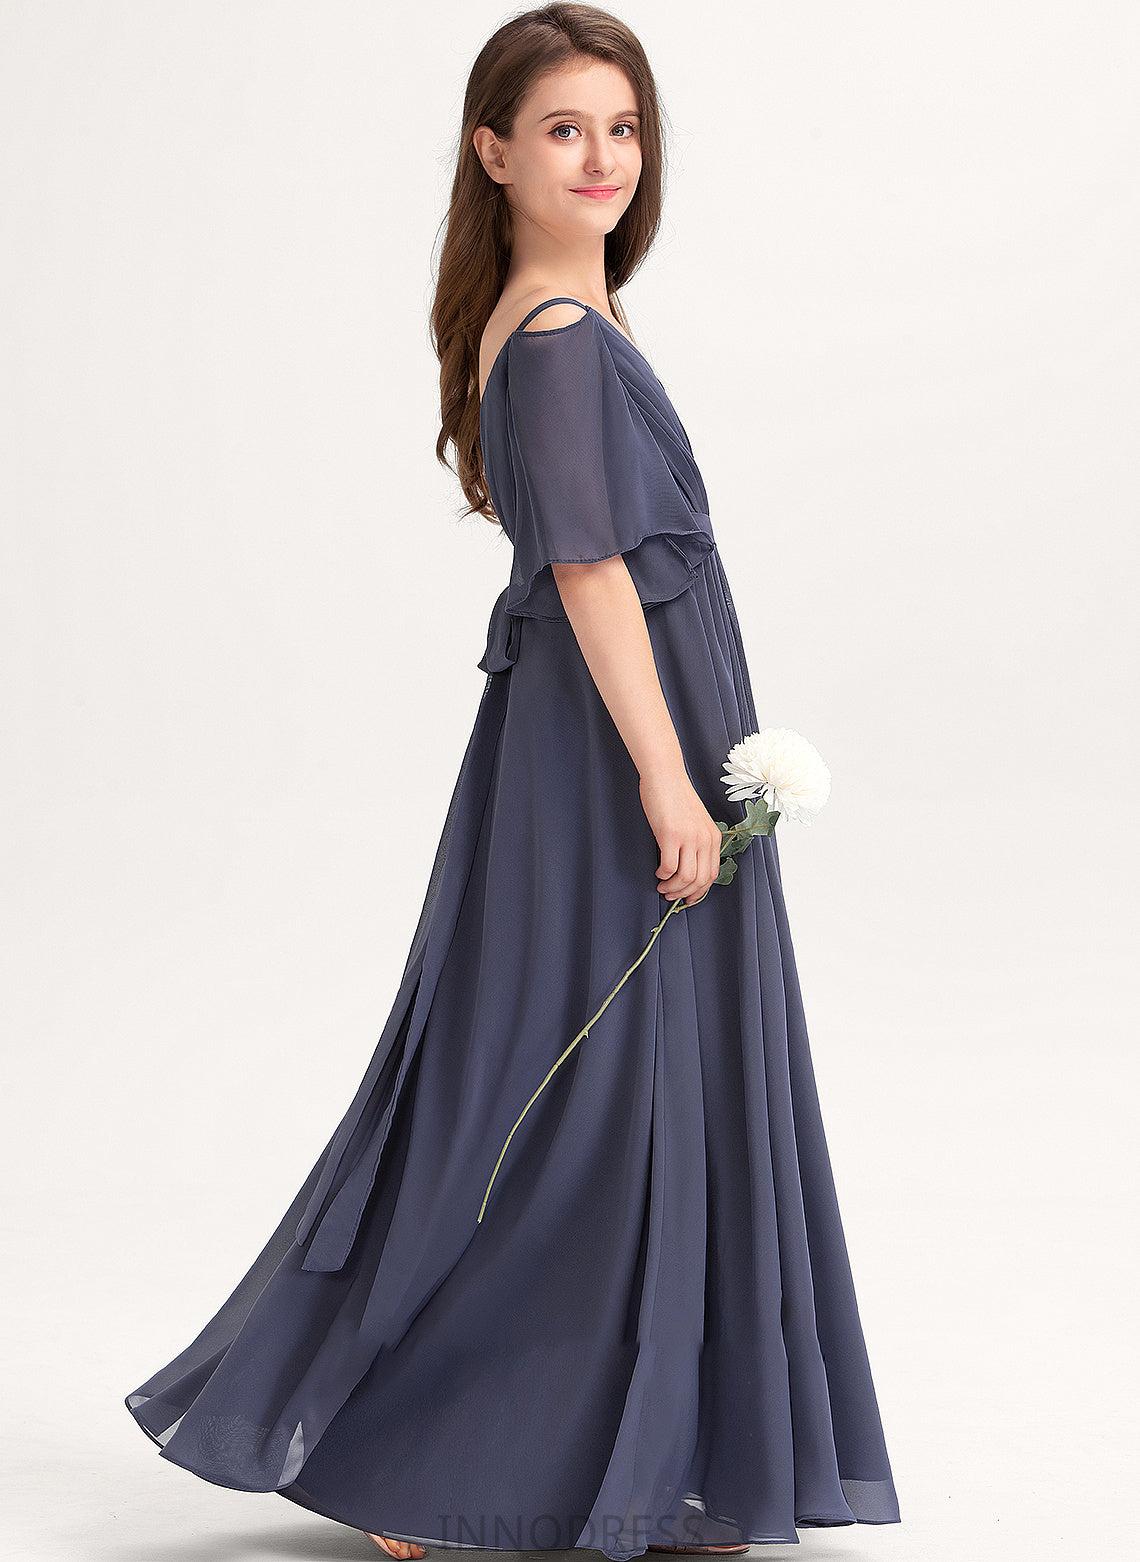 With A-Line Junior Bridesmaid Dresses Off-the-Shoulder Bow(s) Areli Floor-Length Ruffle Chiffon